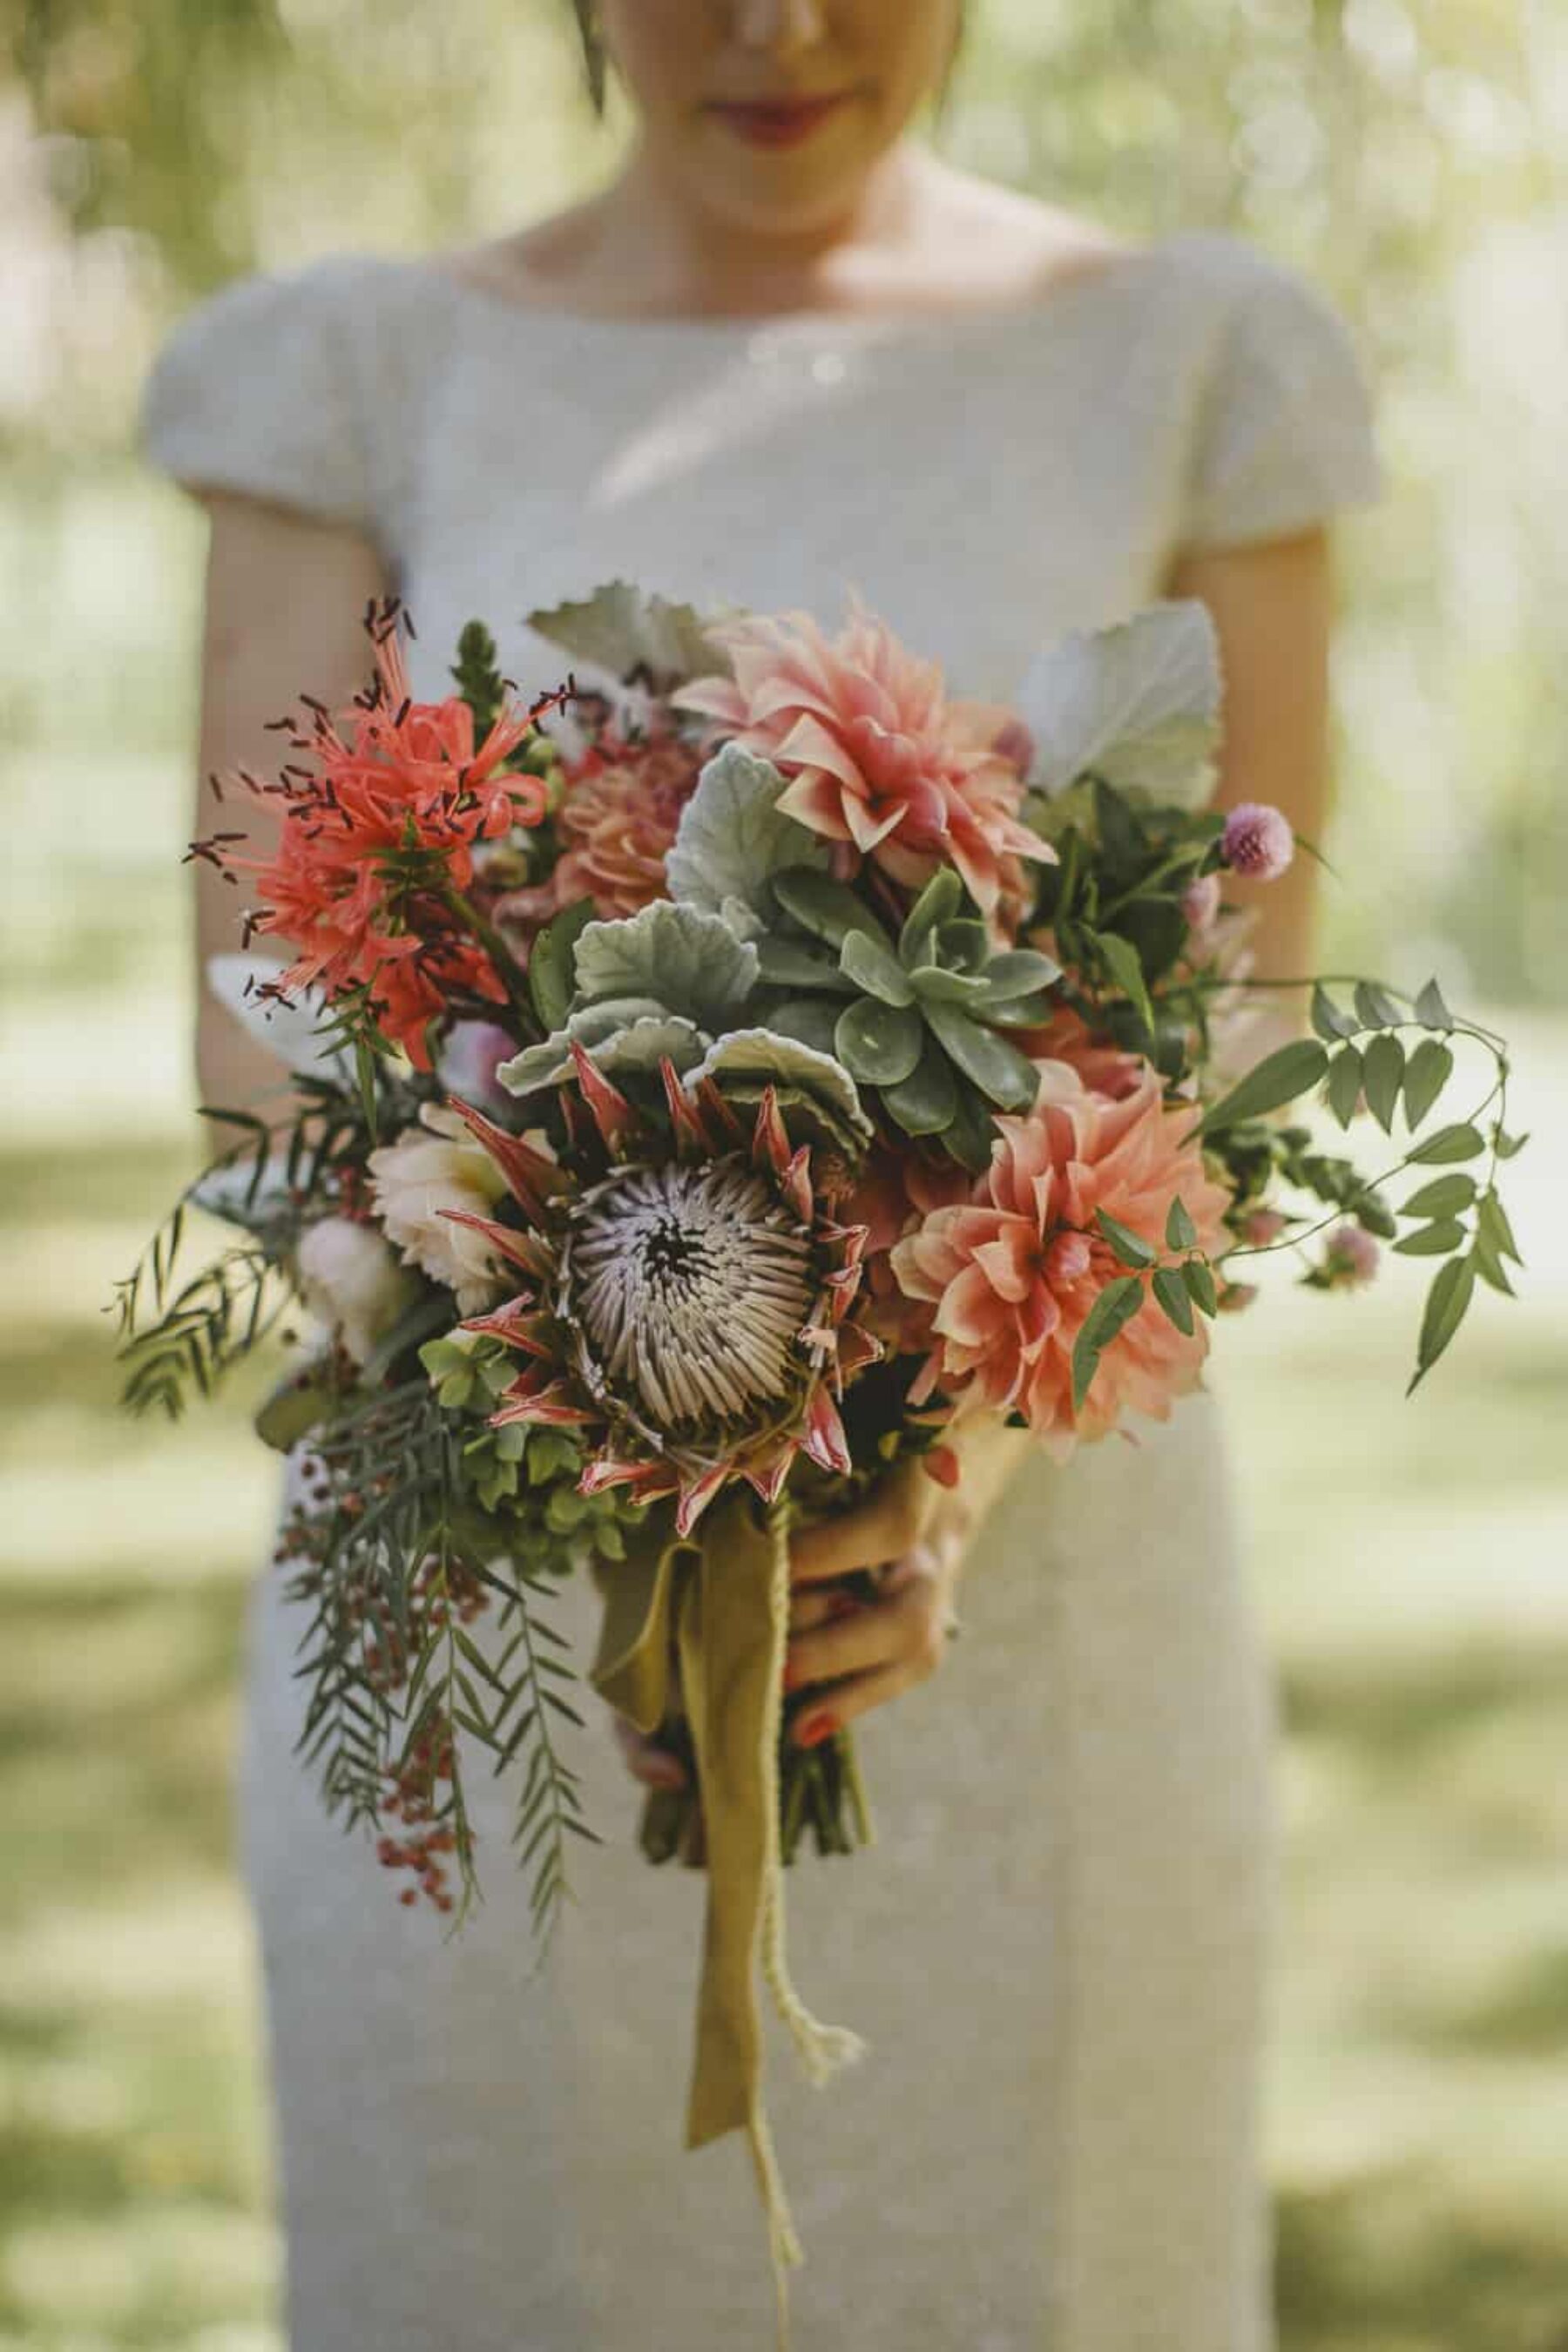 Dahlia and protea bouquet by Mikarla Bauer / Suzanne Harward gown